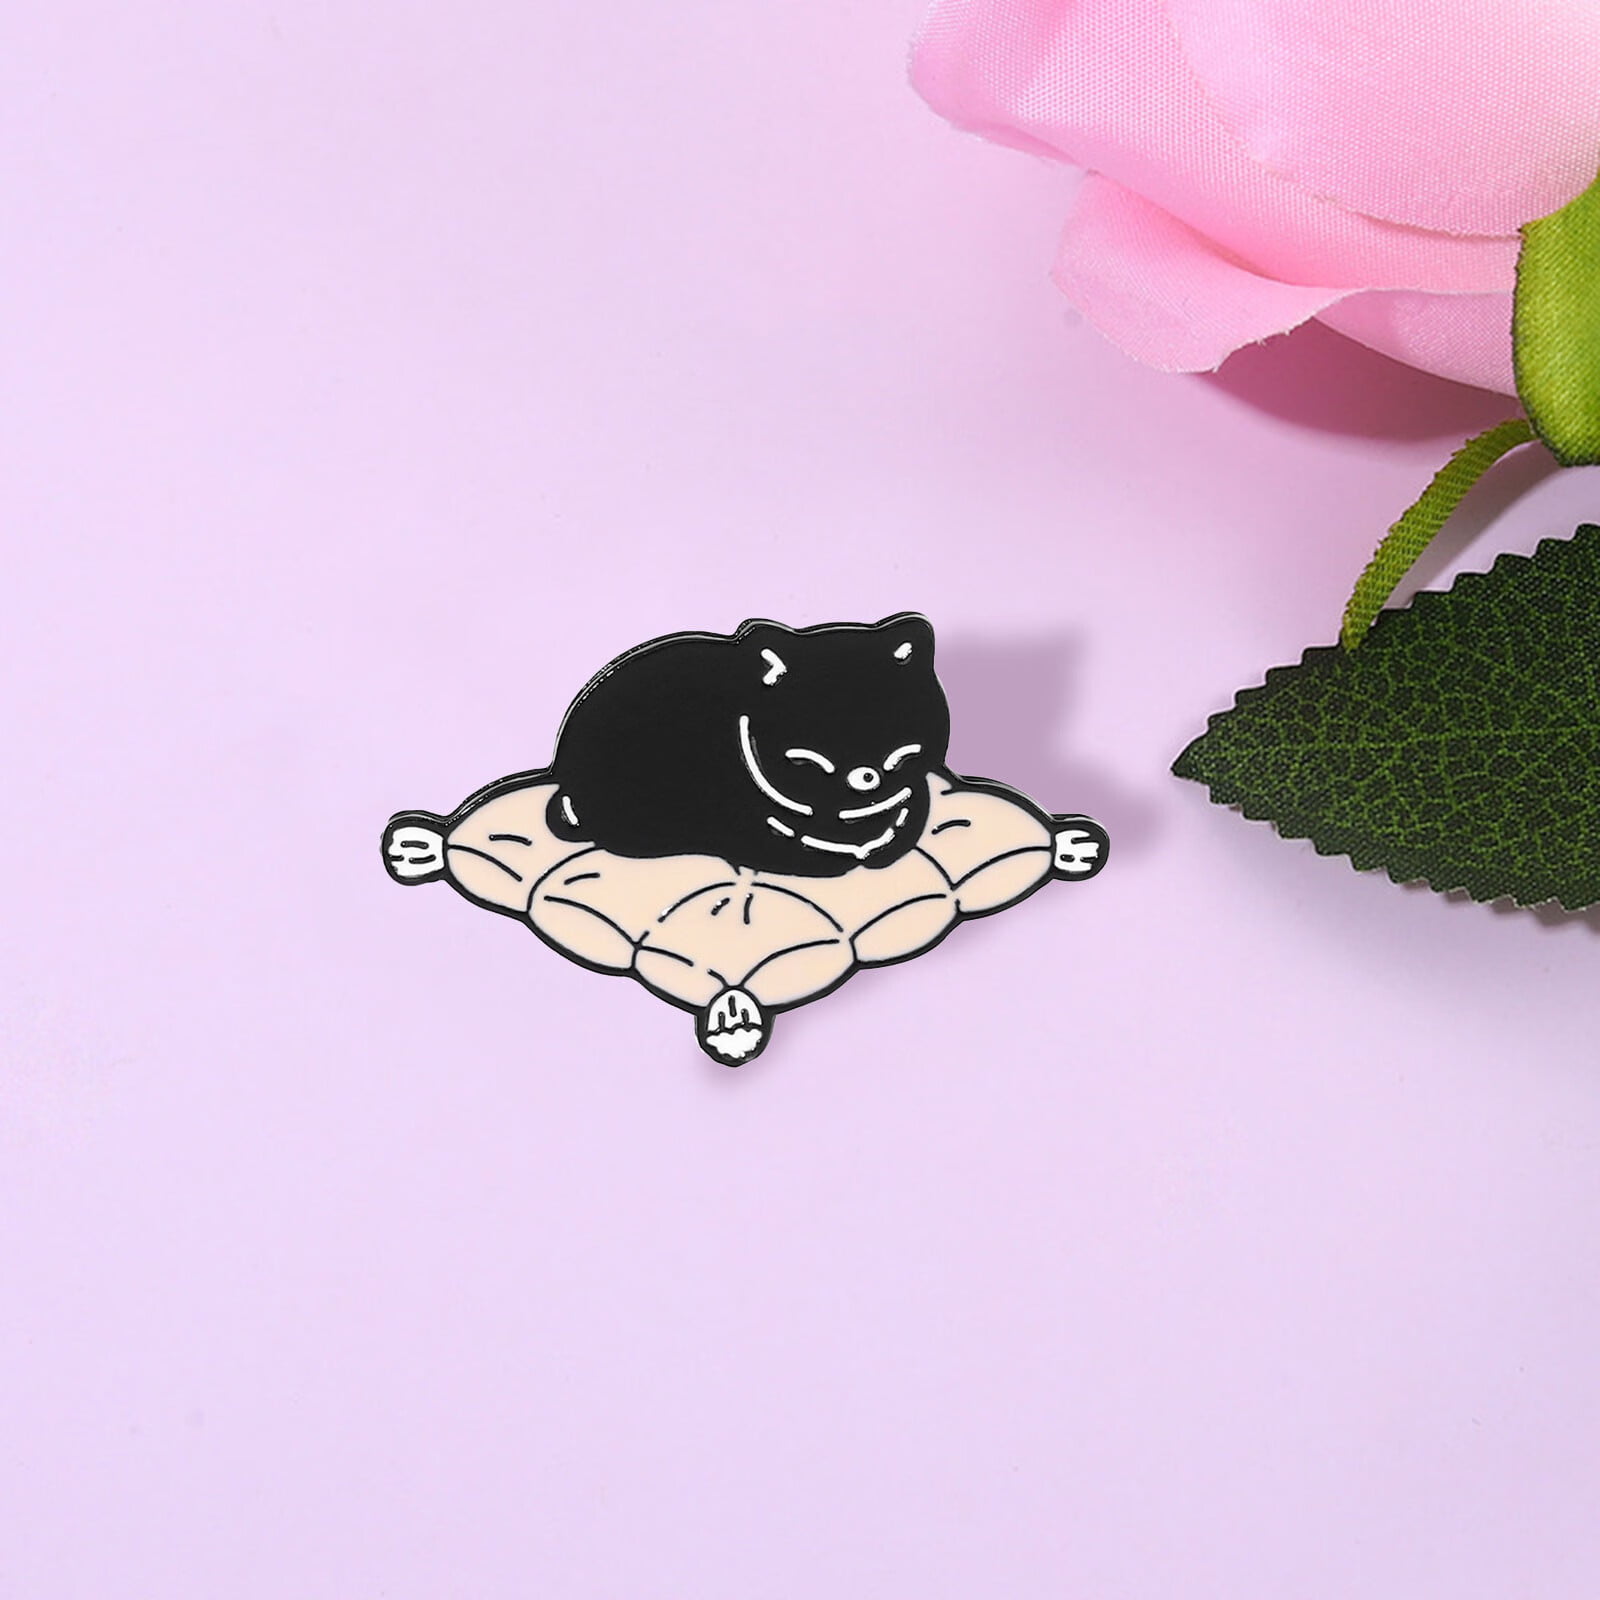 Hoteam 10 Pieces Cat Pins Cute Brooch Pin Set Kawaii Cat Backpack Pin Black Cat Book Brooch Gothic Aesthetic Cat Buttons for Backpacks Clothing Bags Lapel